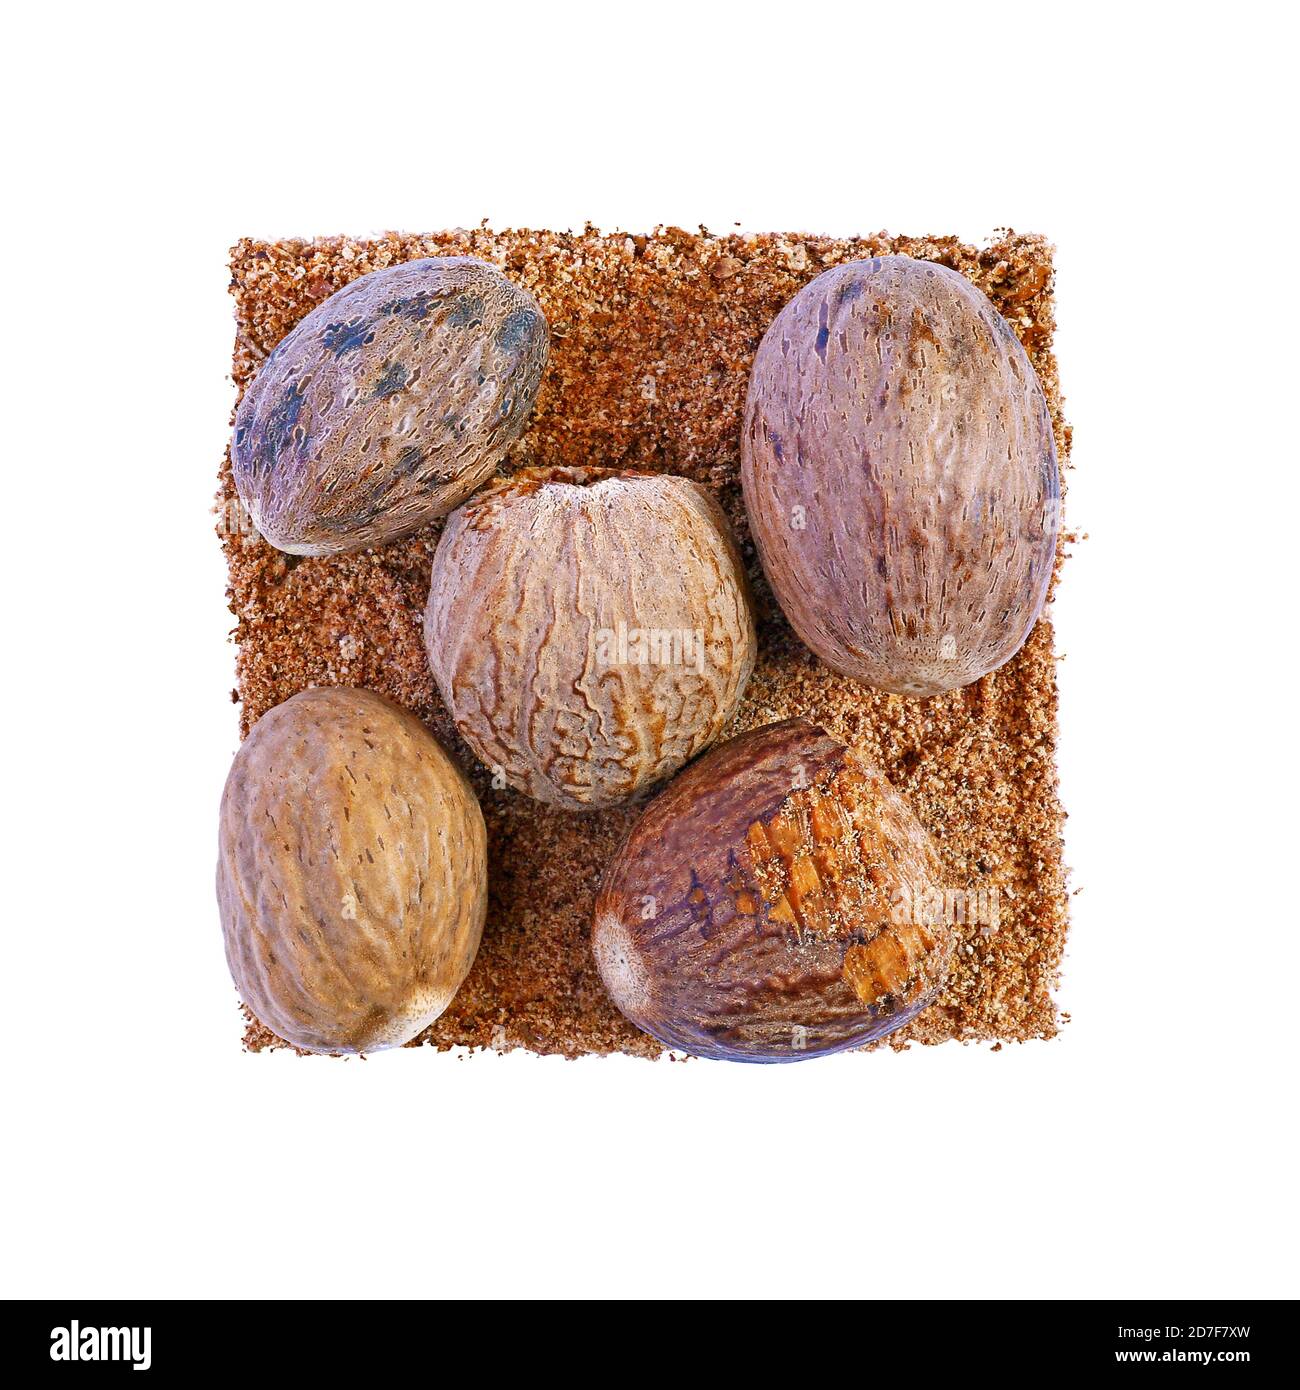 Nutmegs in square composition Stock Photo